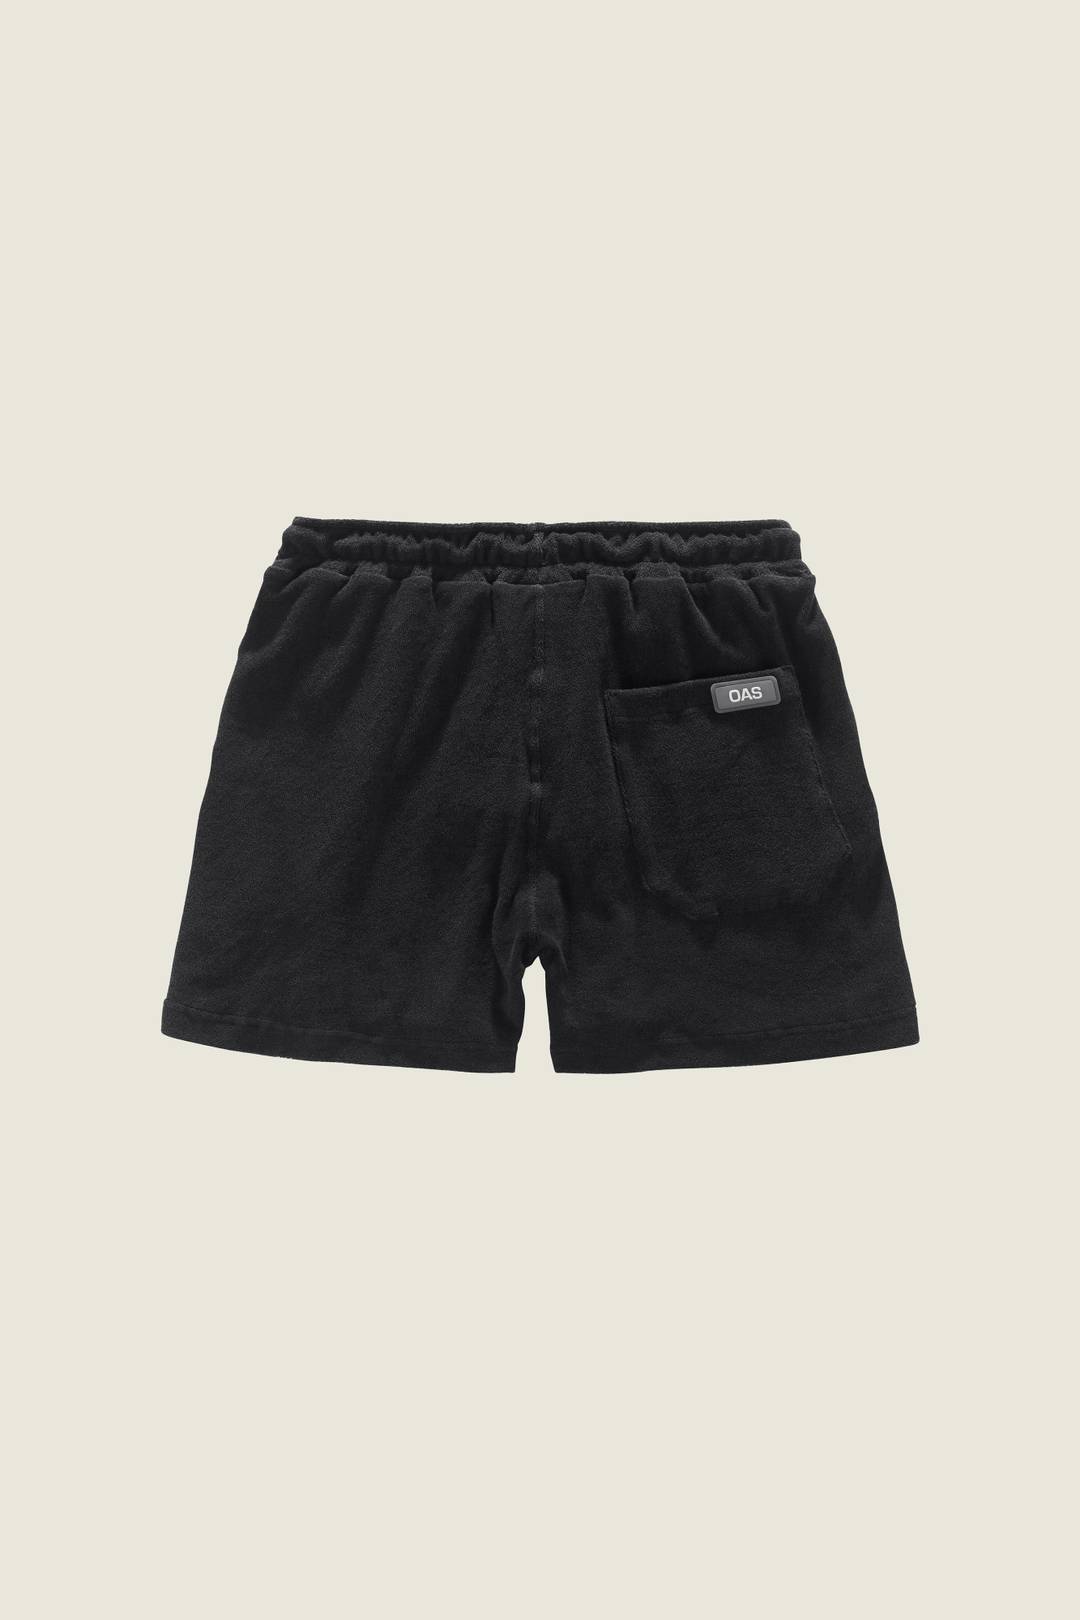 Black Frottee-Shorts | OAS